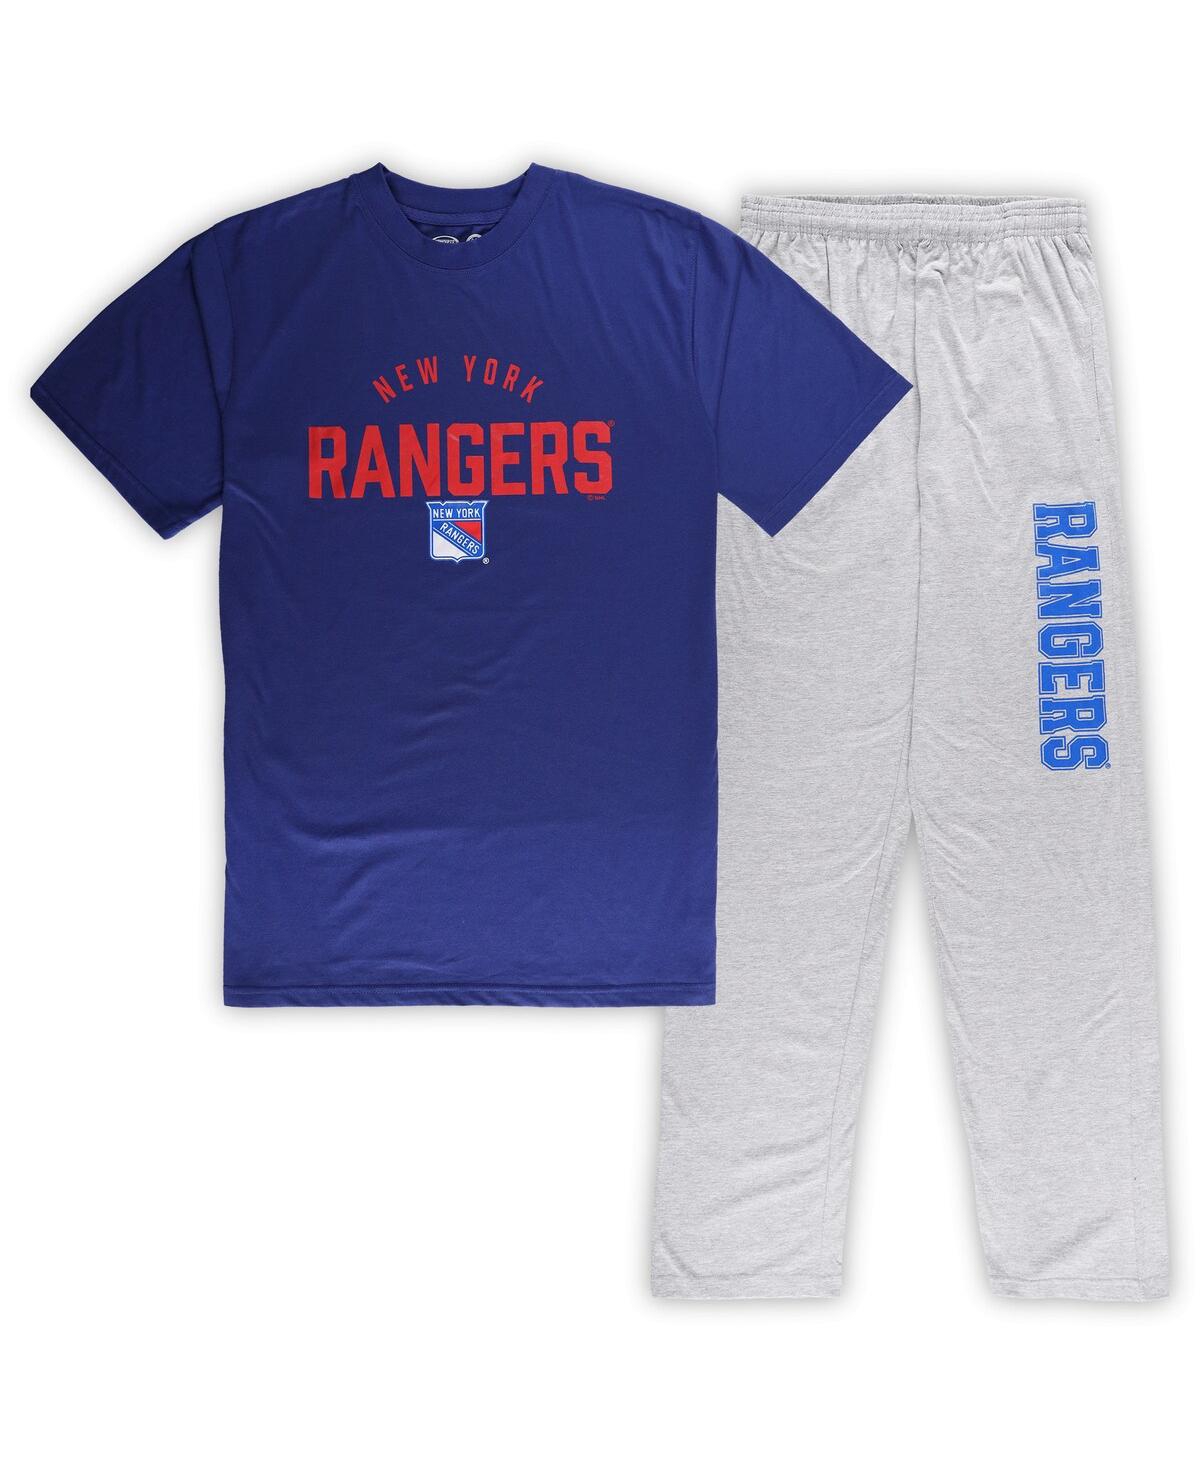 Men's New York Rangers Blue, Heather Gray Big and Tall T-shirt and Pants Lounge Set - Blue, Heather Gray